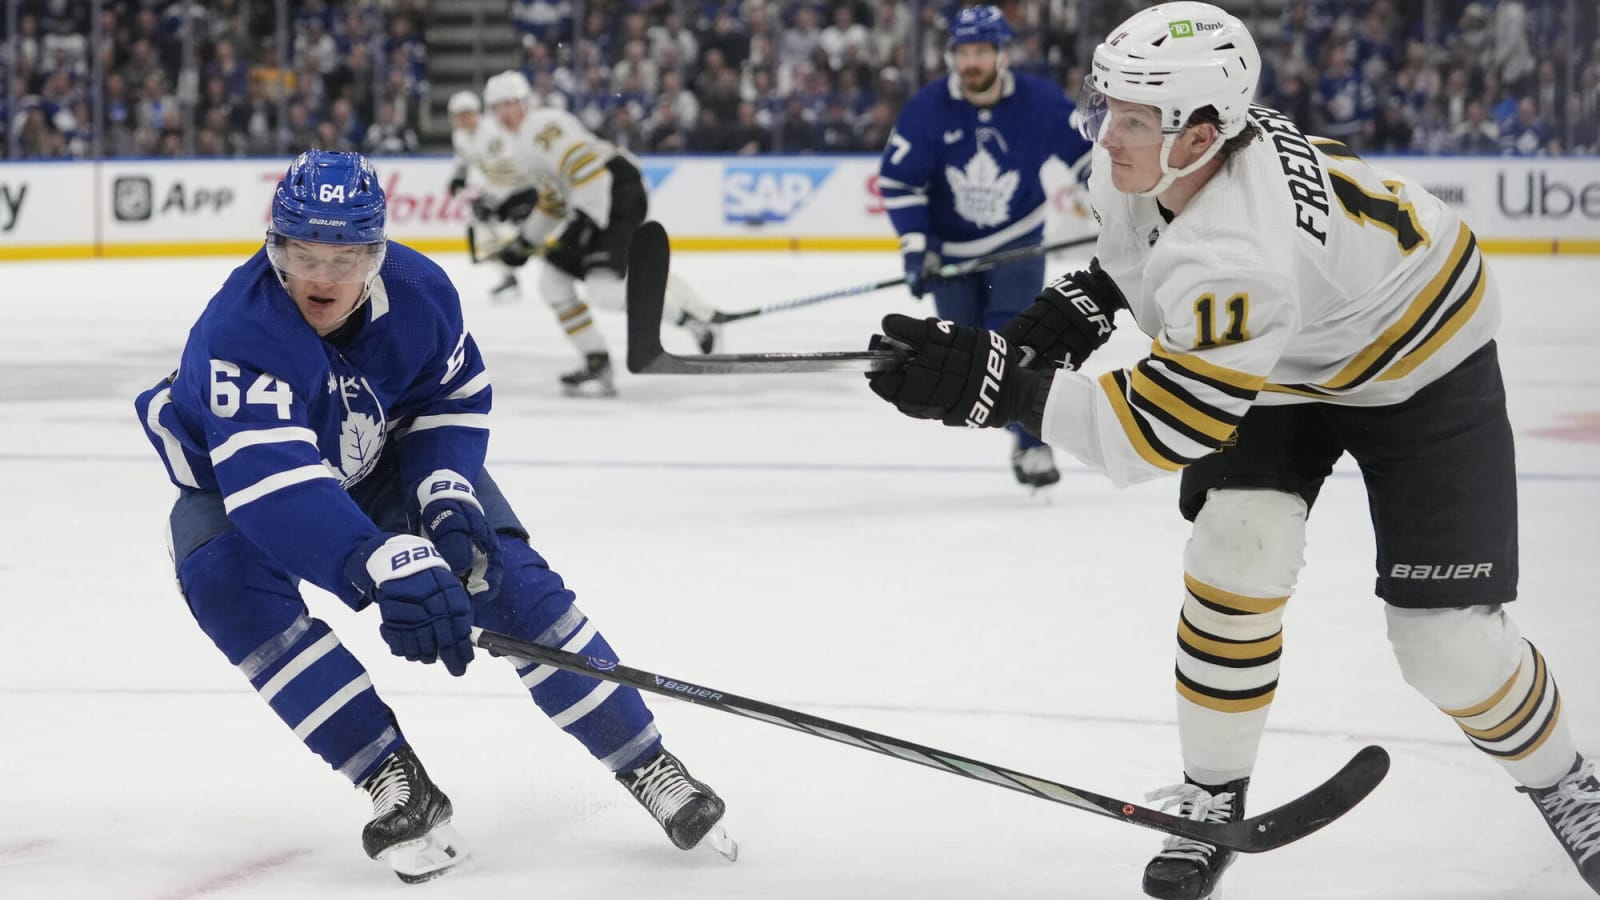 Lack of scoring and special team woes hurt Maple Leafs in Game 3 loss to Bruins